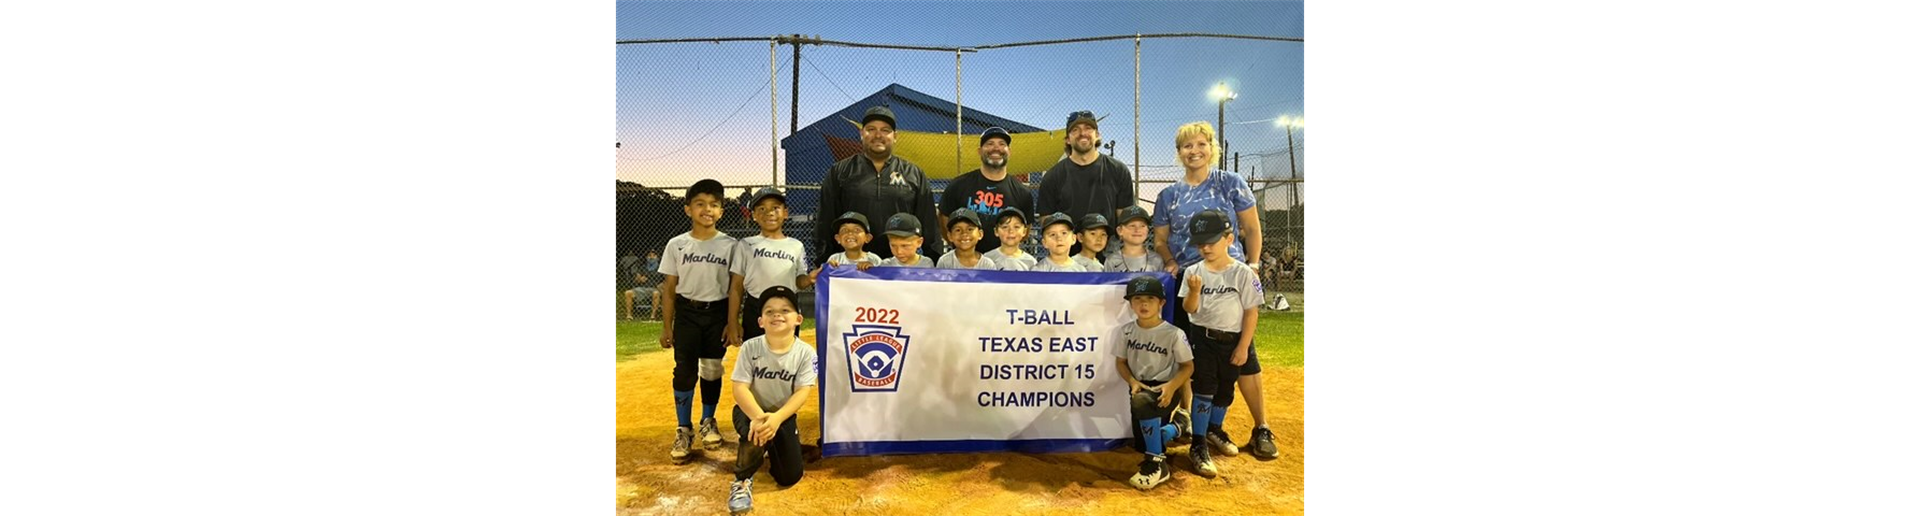 District 15 TBall Champions